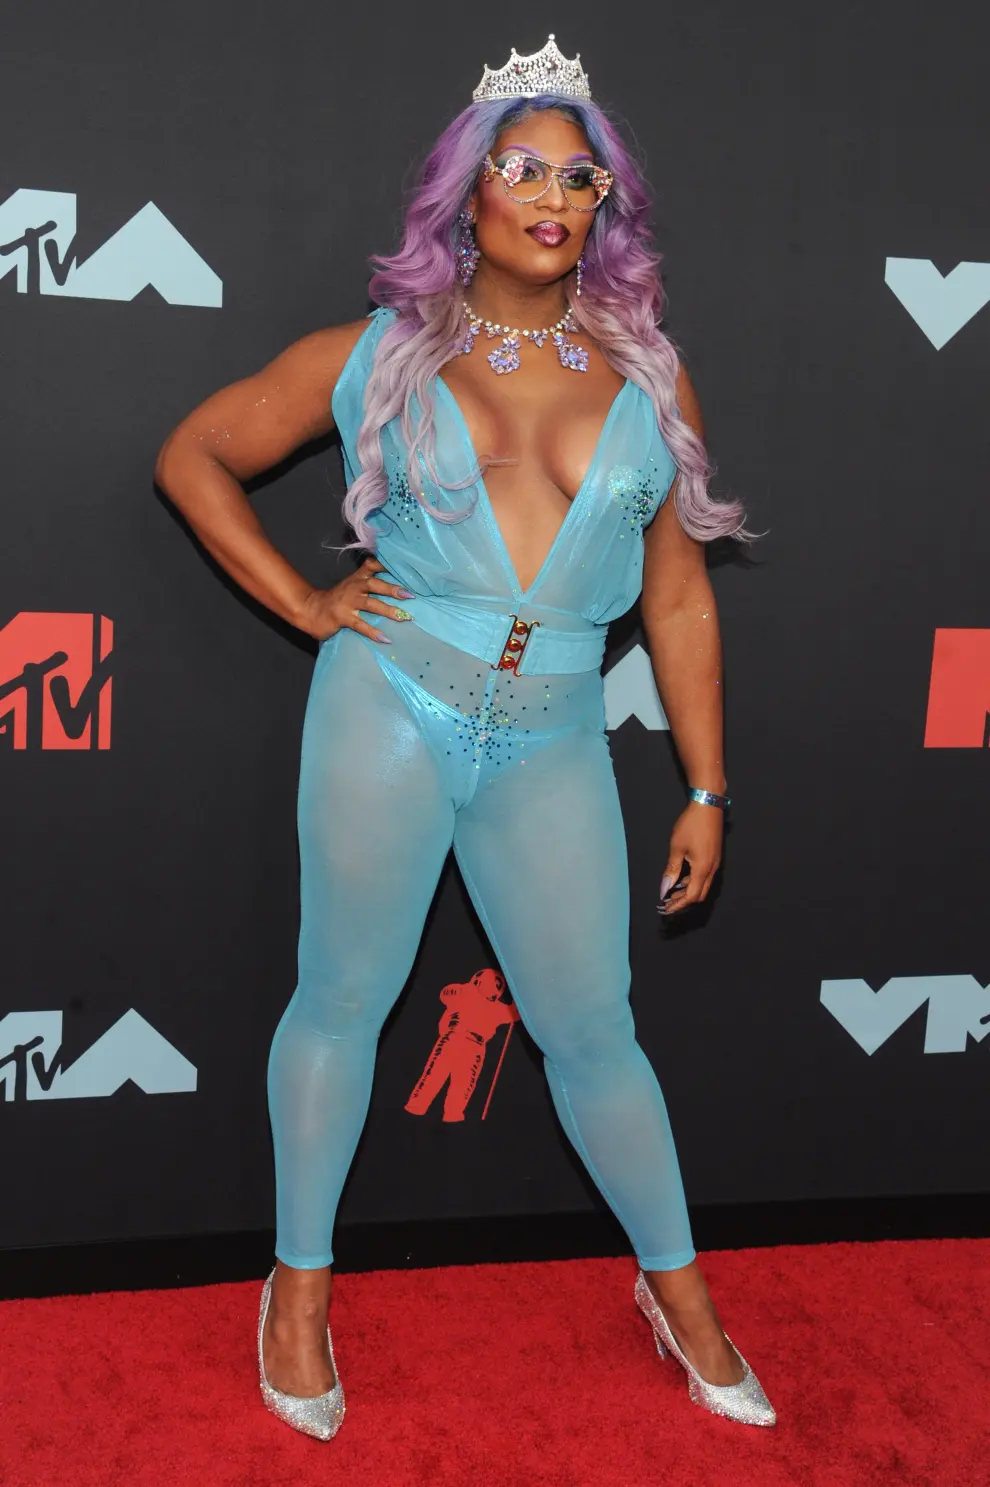 New York (United States), 26/08/2019.- Filipino actress Tiffany Panhilason arrives on the red carpet for the 2019 MTV Video Music Awards at Radio City Music Hall in New York, New York, USA, 26 August 2019. (Estados Unidos, Nueva York) EFE/EPA/DJ JOHNSON 2019 MTV Video Music Awards in New York